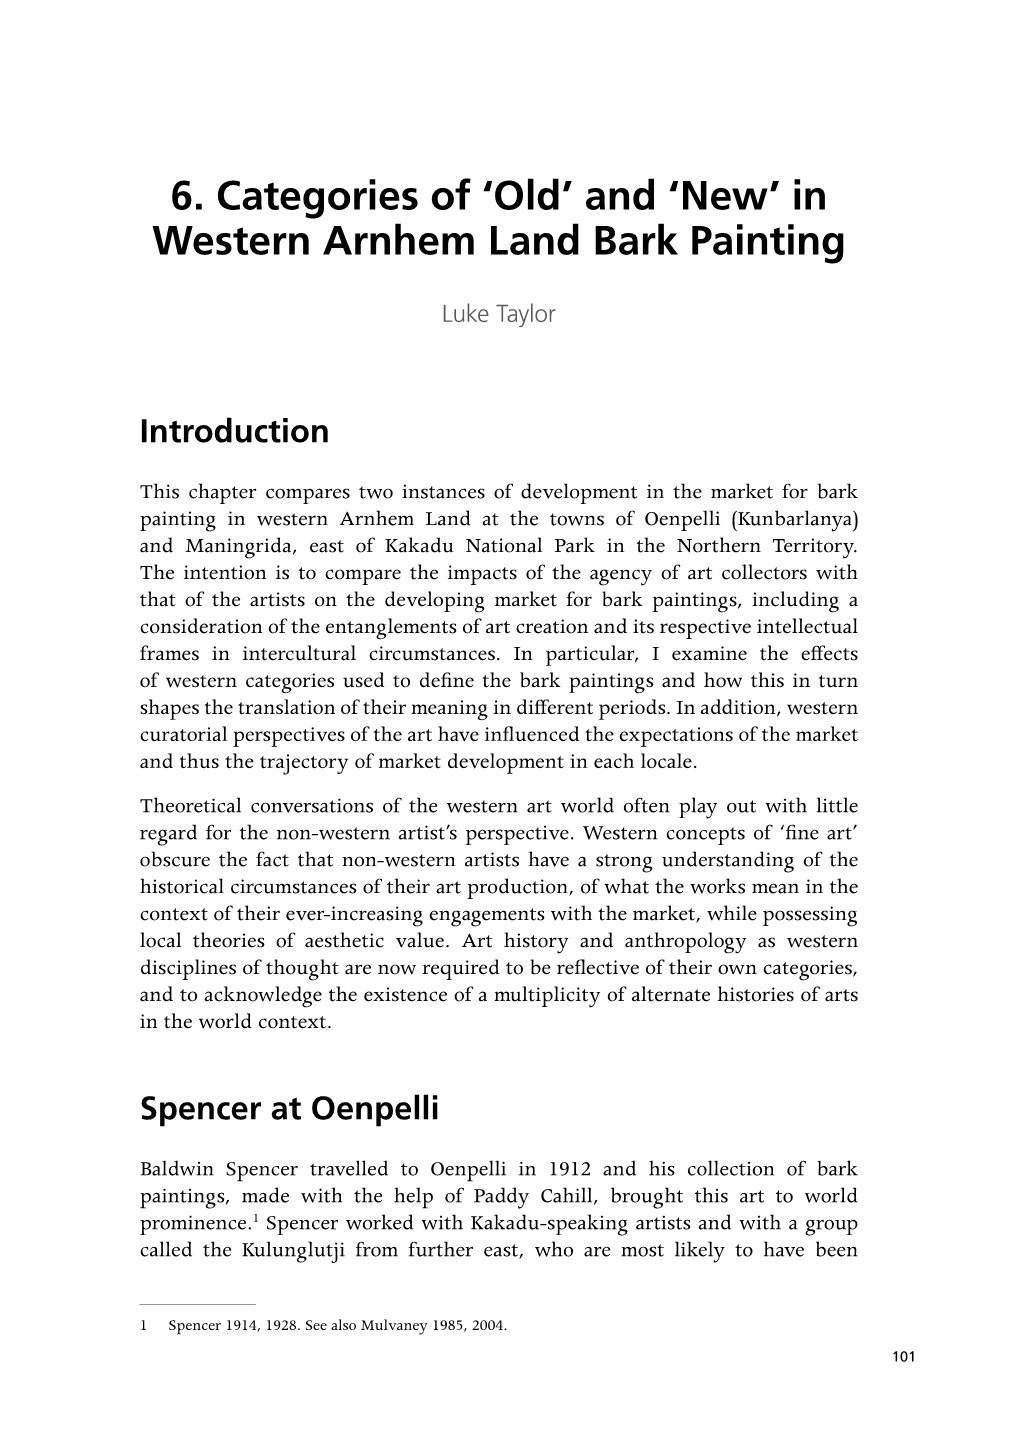 'Old' and 'New' in Western Arnhem Land Bark Painting